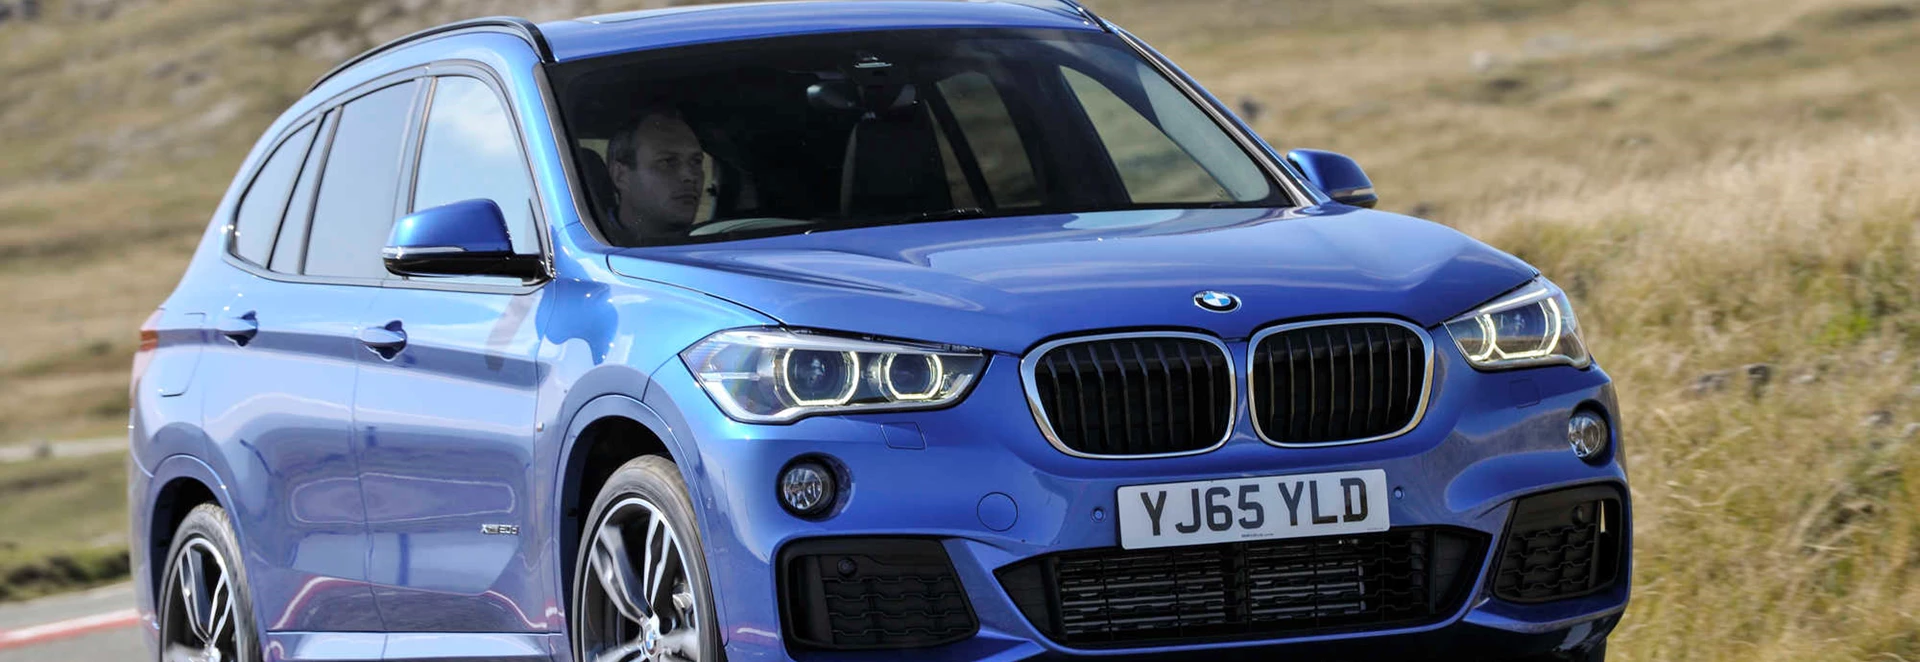 BMW X1 crossover review 